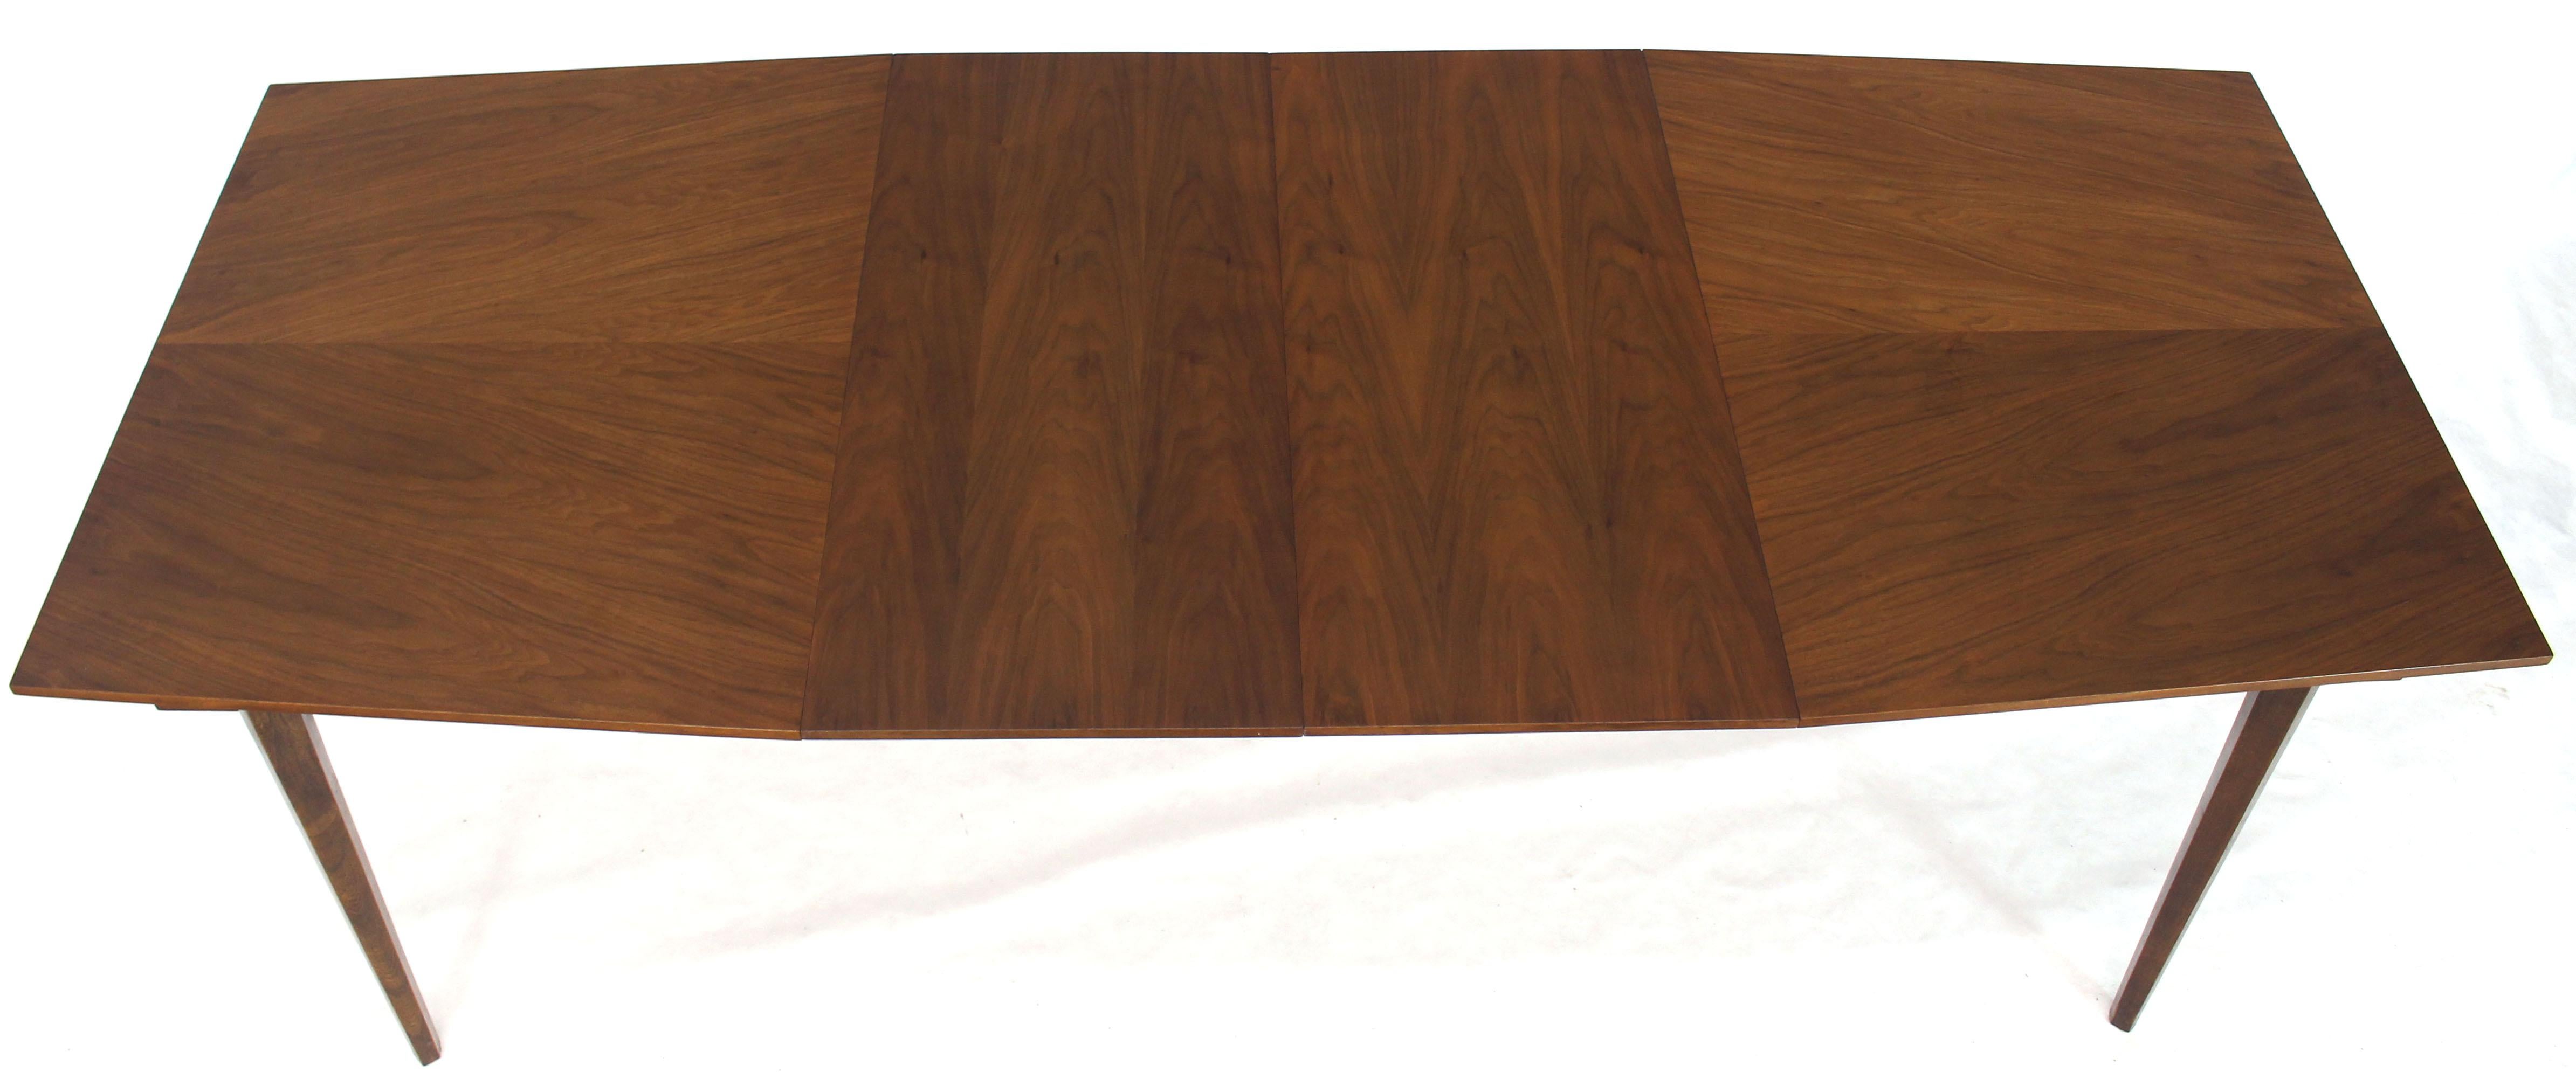 Danish Mid-Century Modern Walnut Wide Rectangle Dining Table 2 Extension Boards For Sale 3